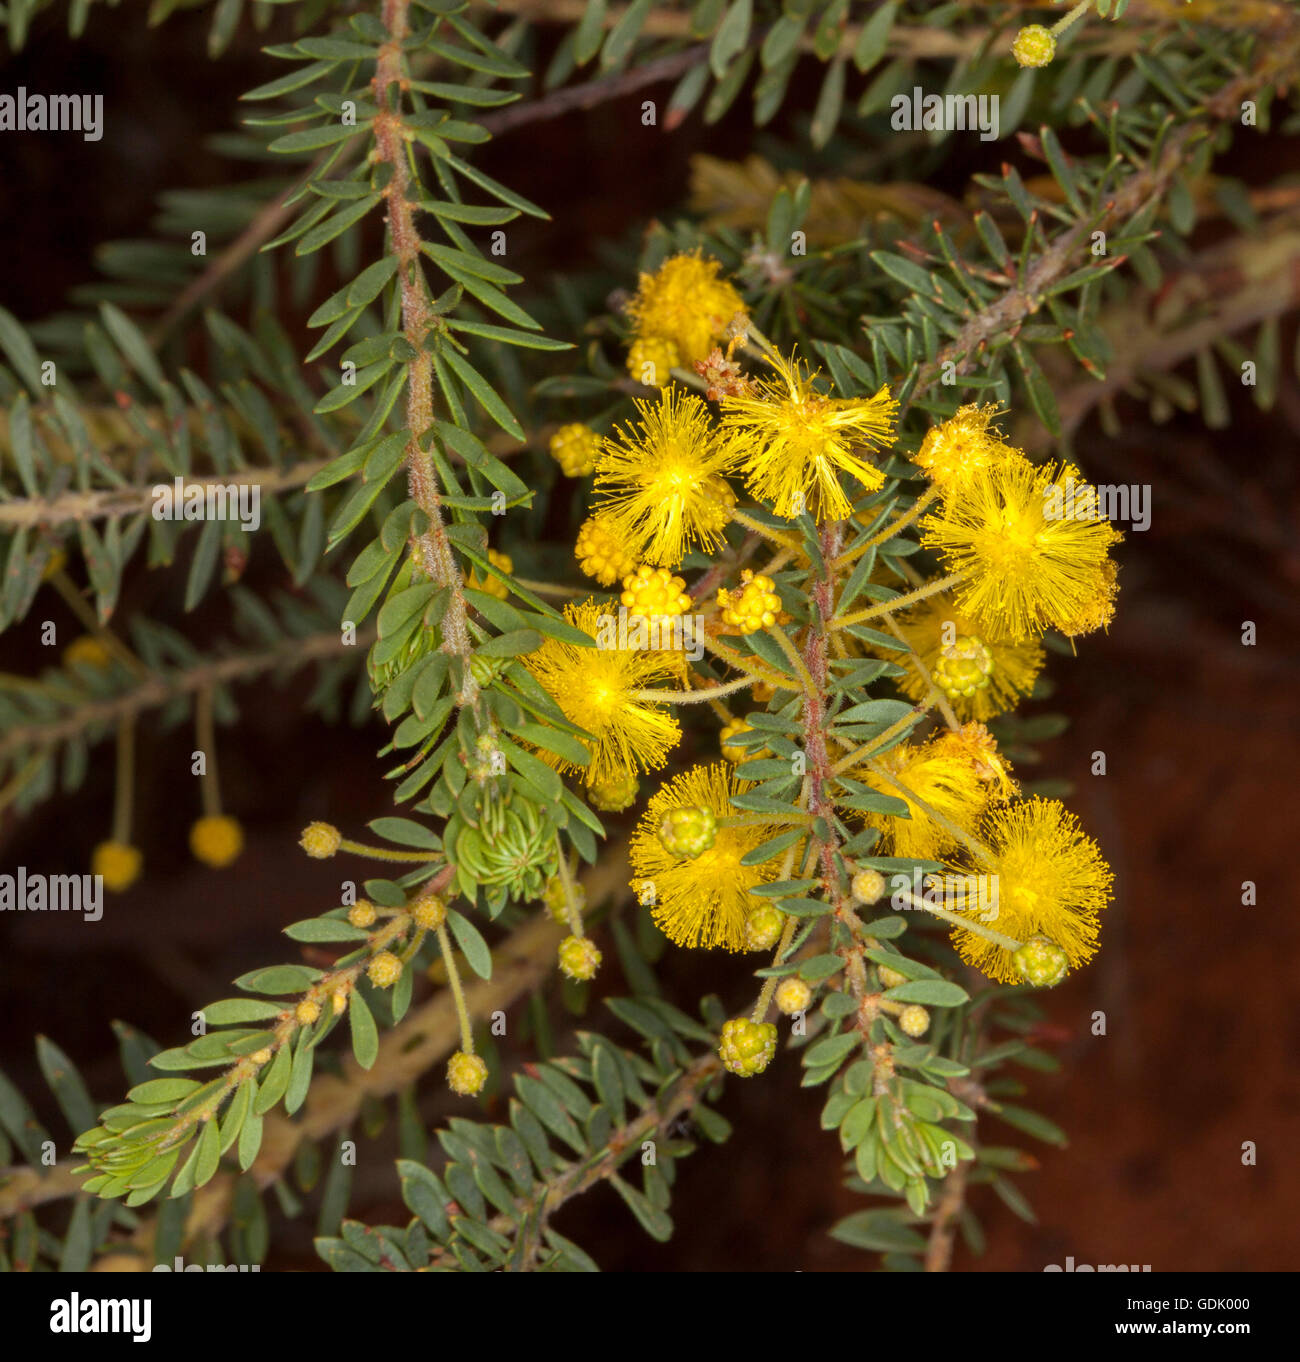 Cluster of vivid yellow acacia / wattle flowers and bright green leaves of native shrub in outback Australia Stock Photo